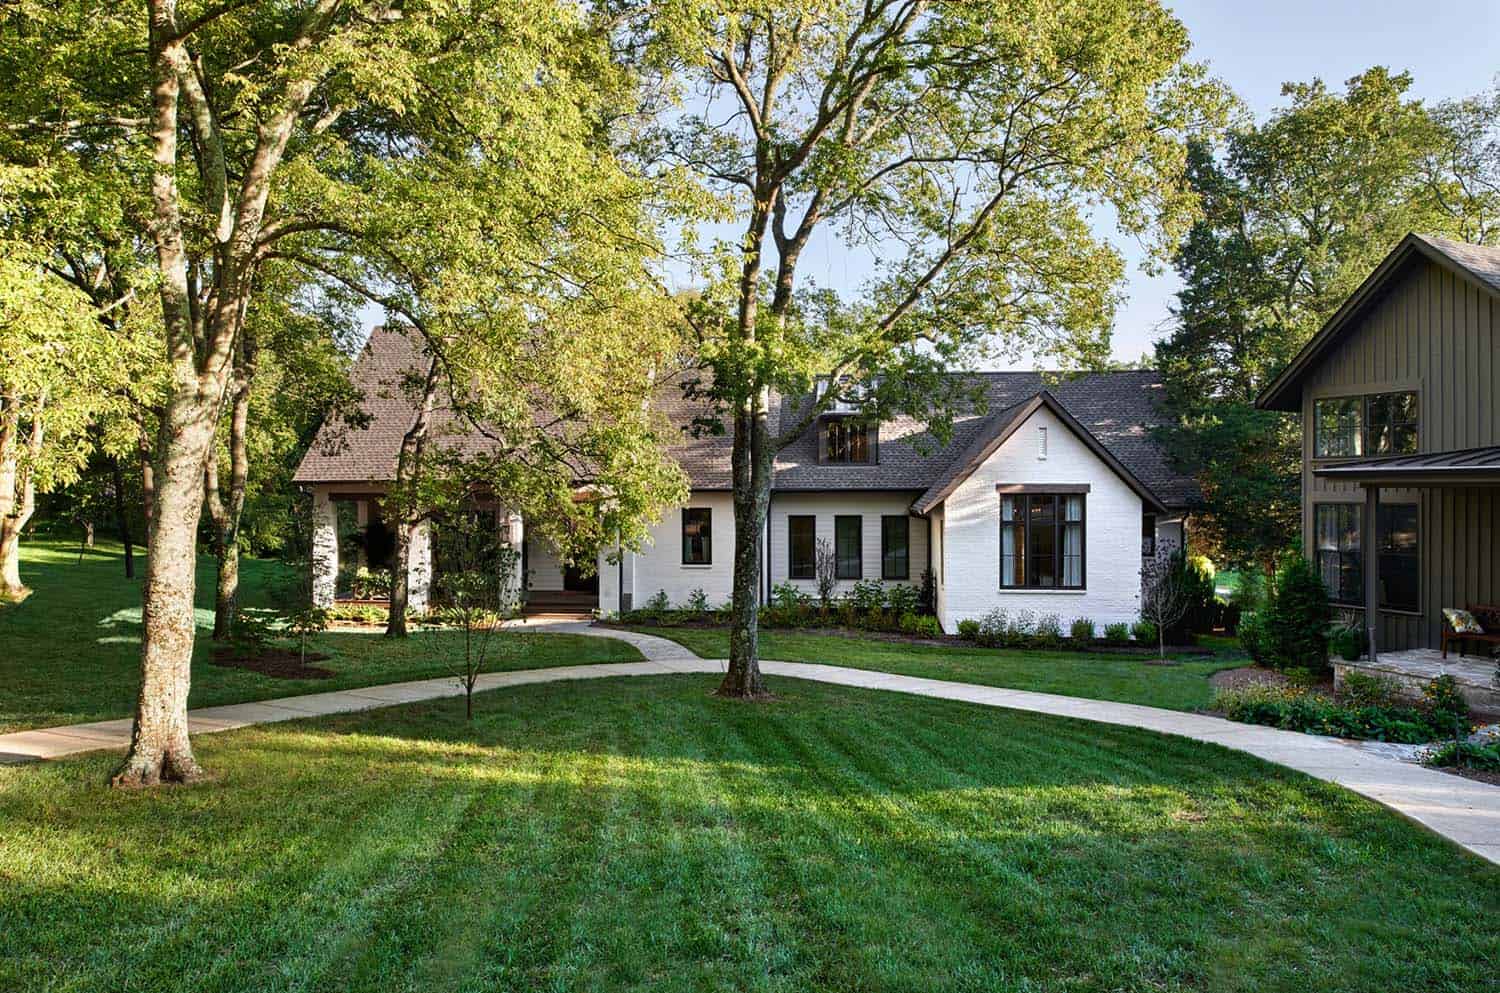 transitional-style-home-exterior-designed-for-empty-nesters